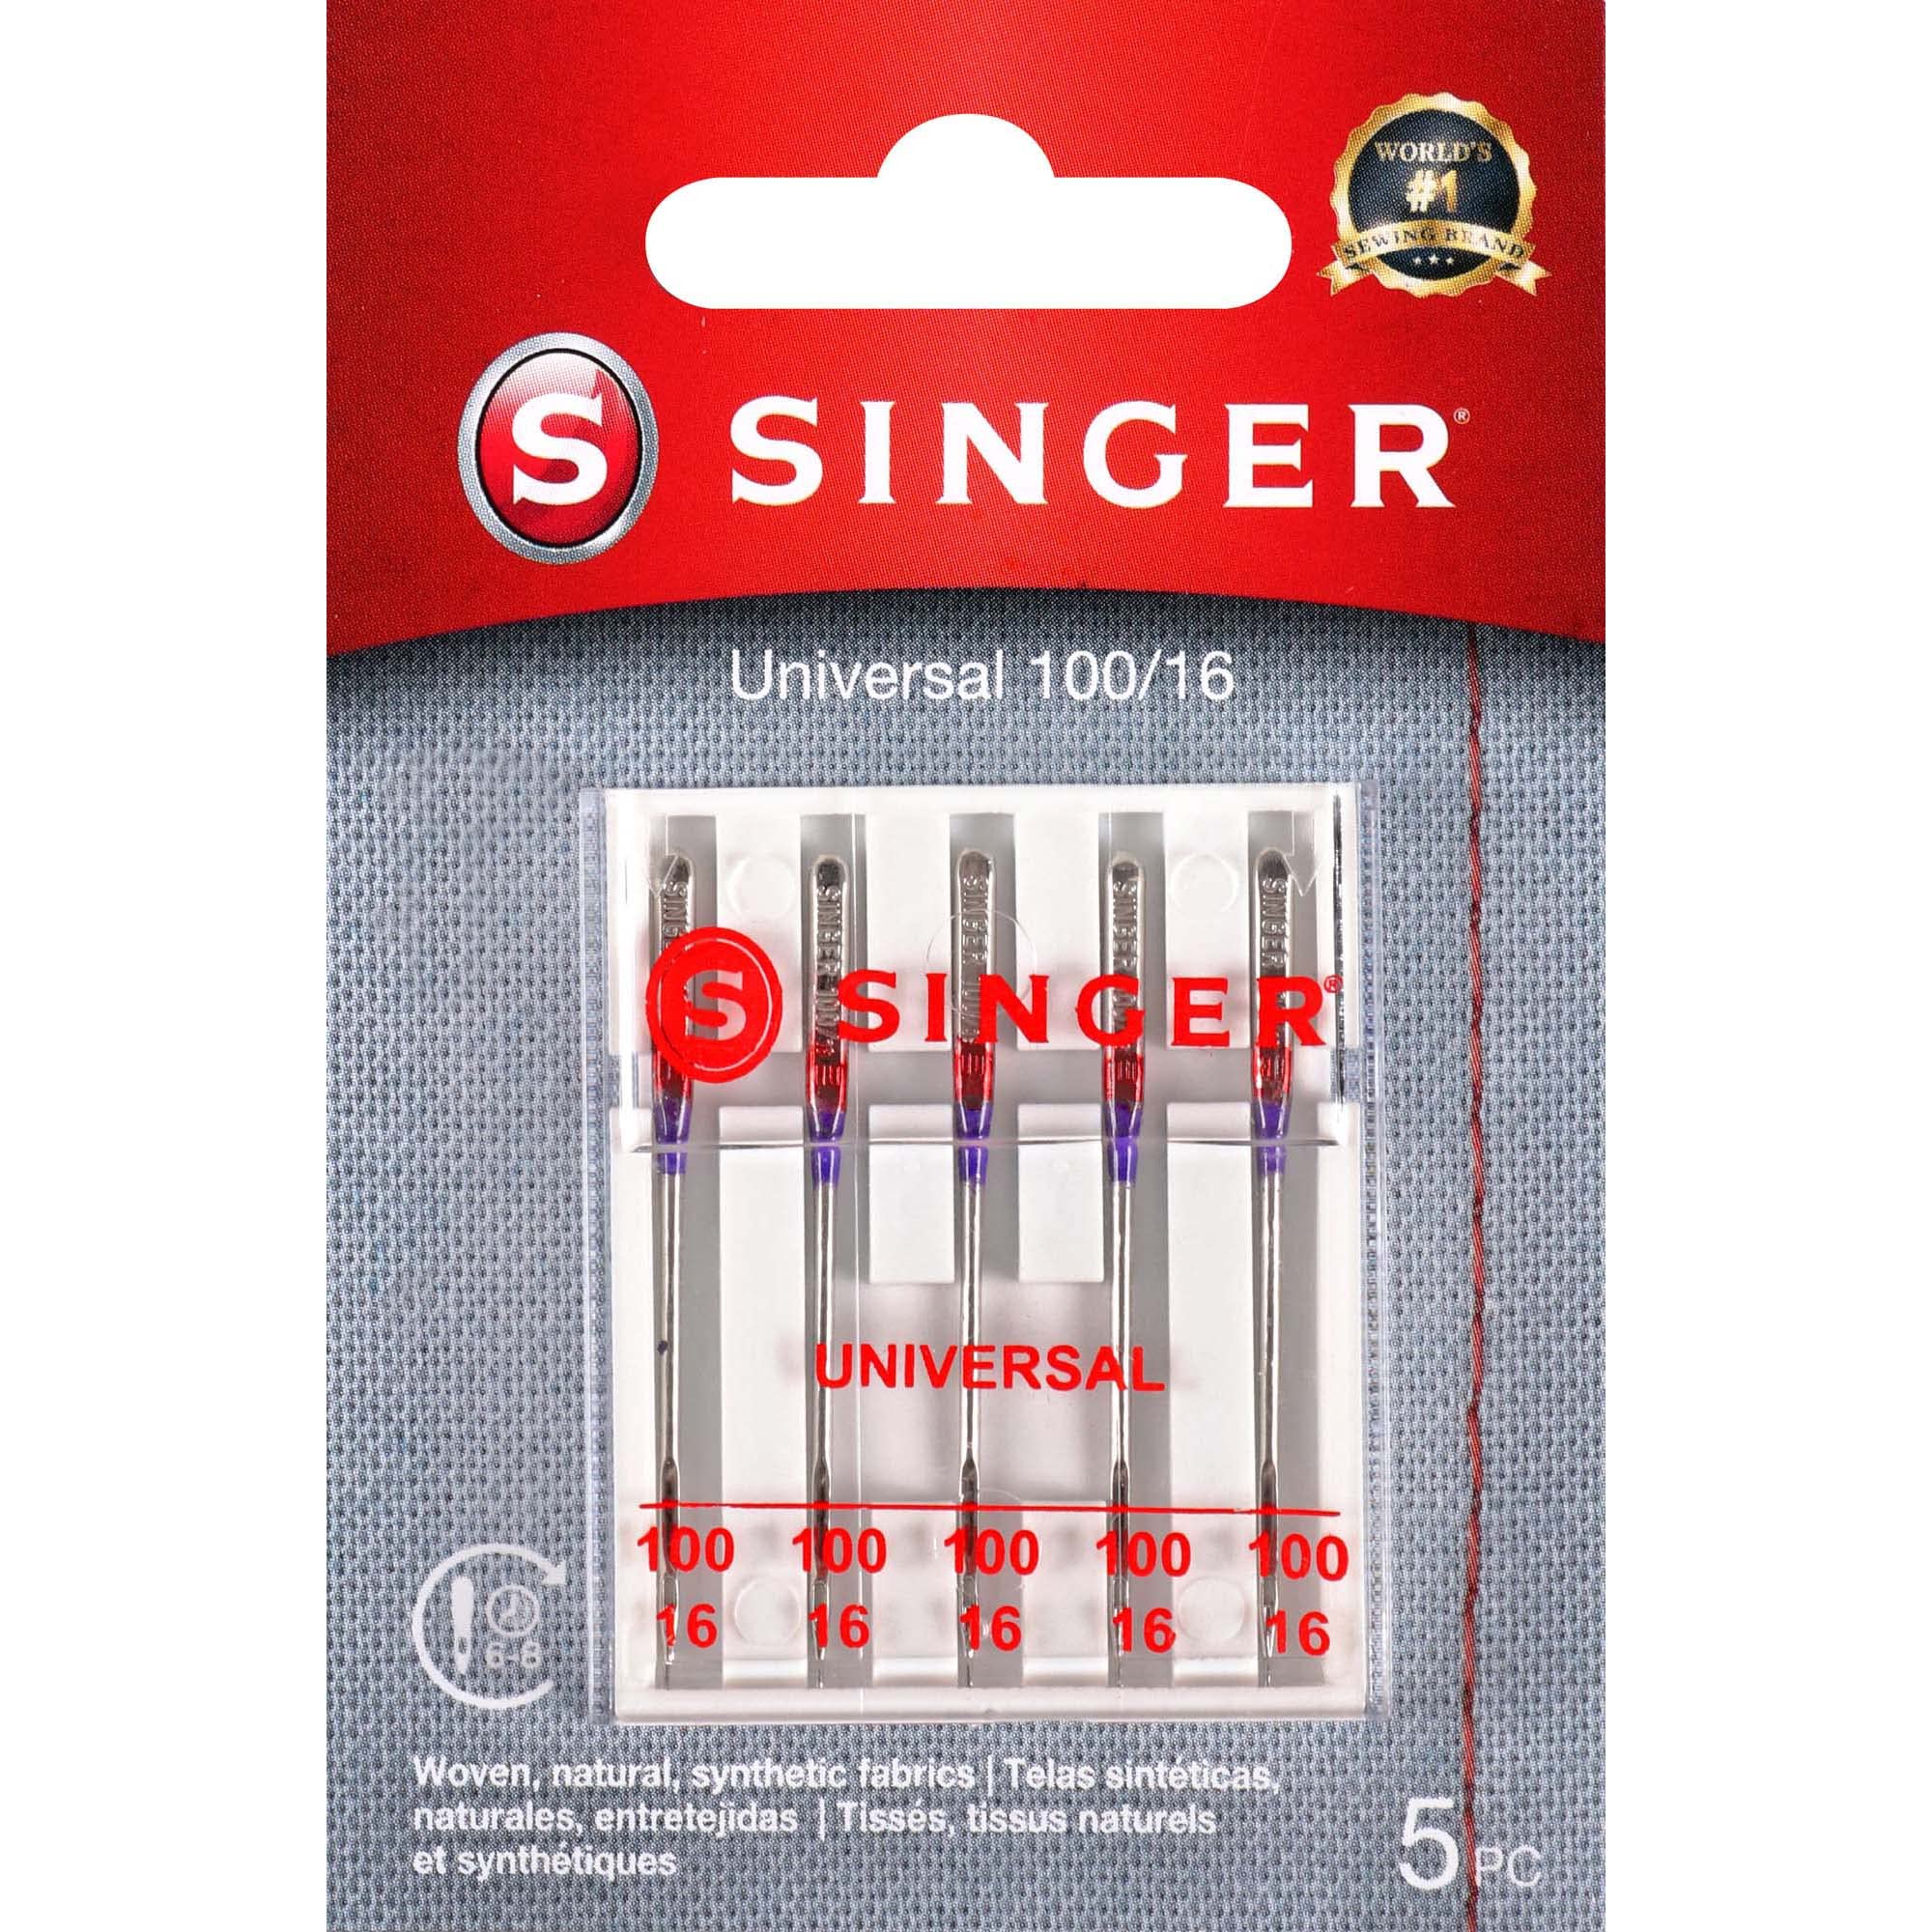 SINGER Heavy Duty Sewing Machine Needles, Size 100/16 - 5 Count